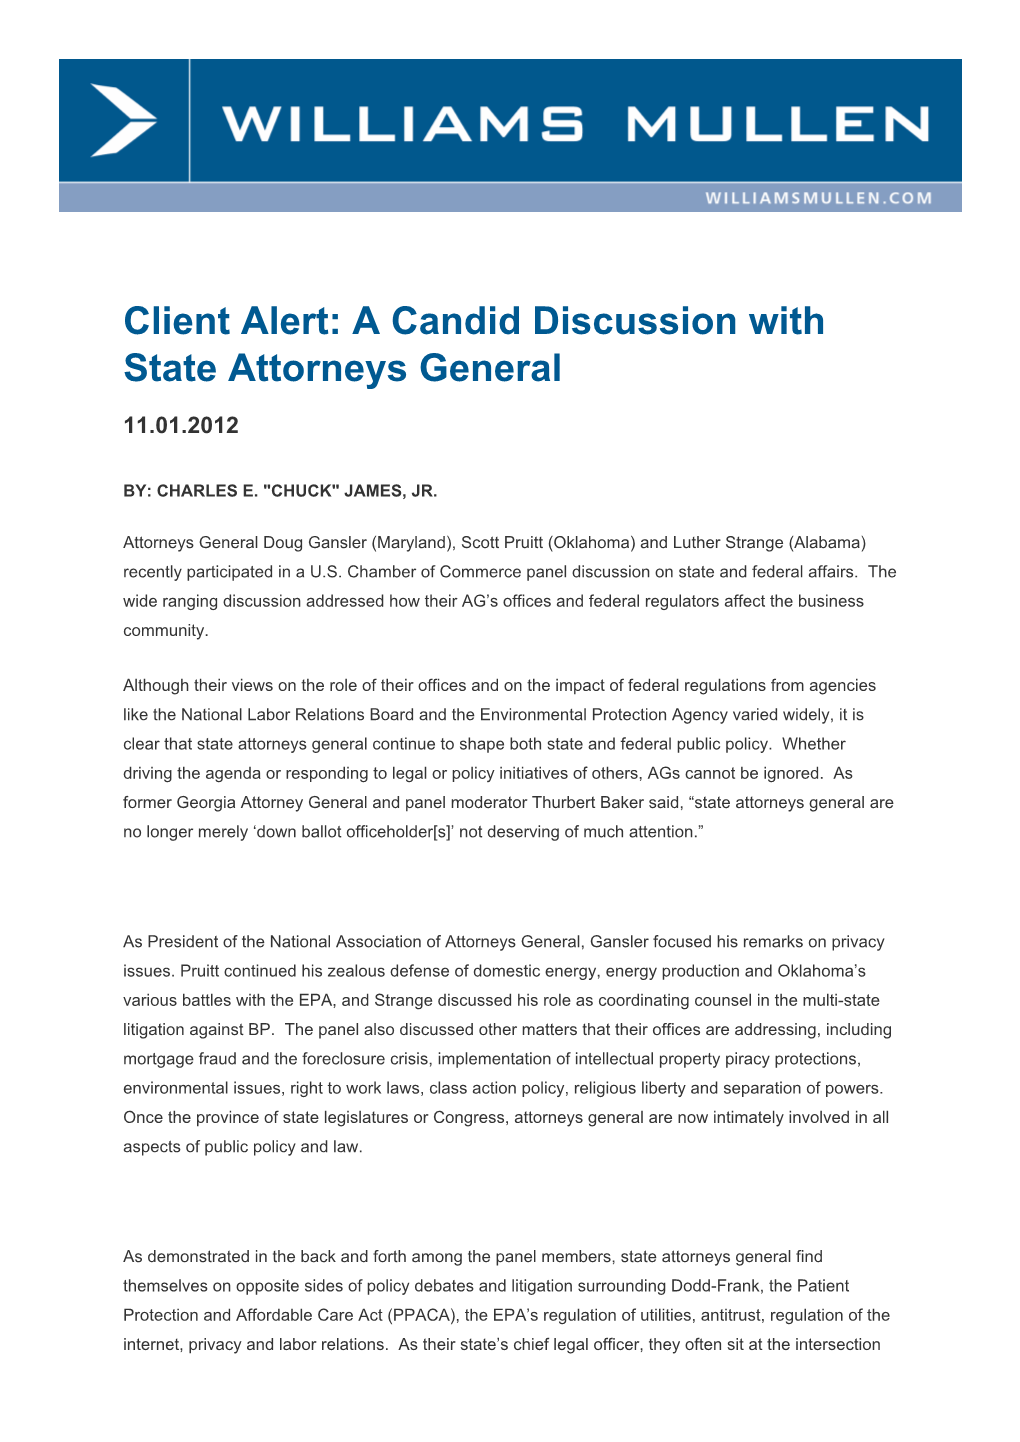 Client Alert: a Candid Discussion with State Attorneys General